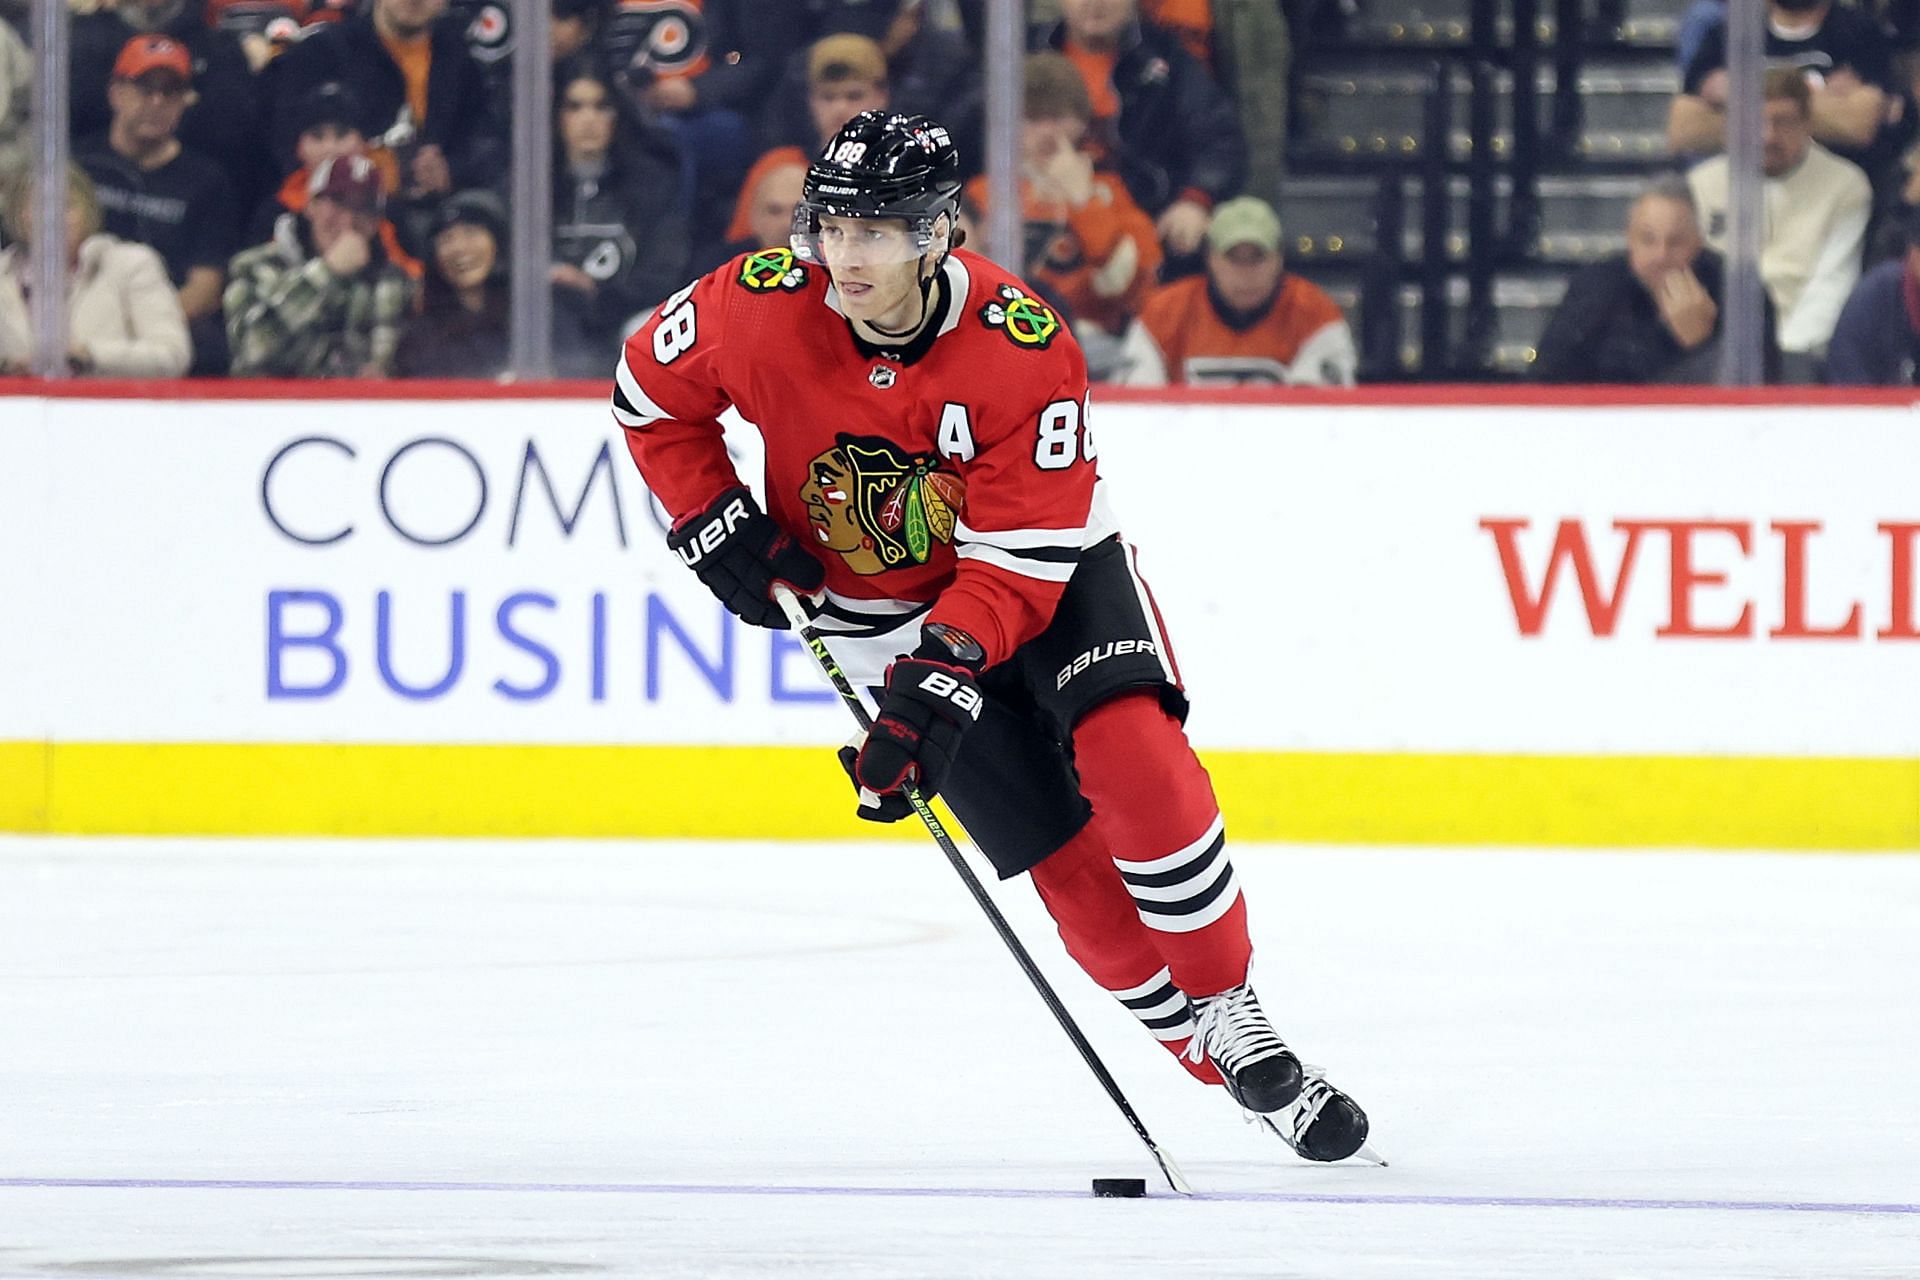 A Spurt in Patrick Kane's Season of Growth - The New York Times